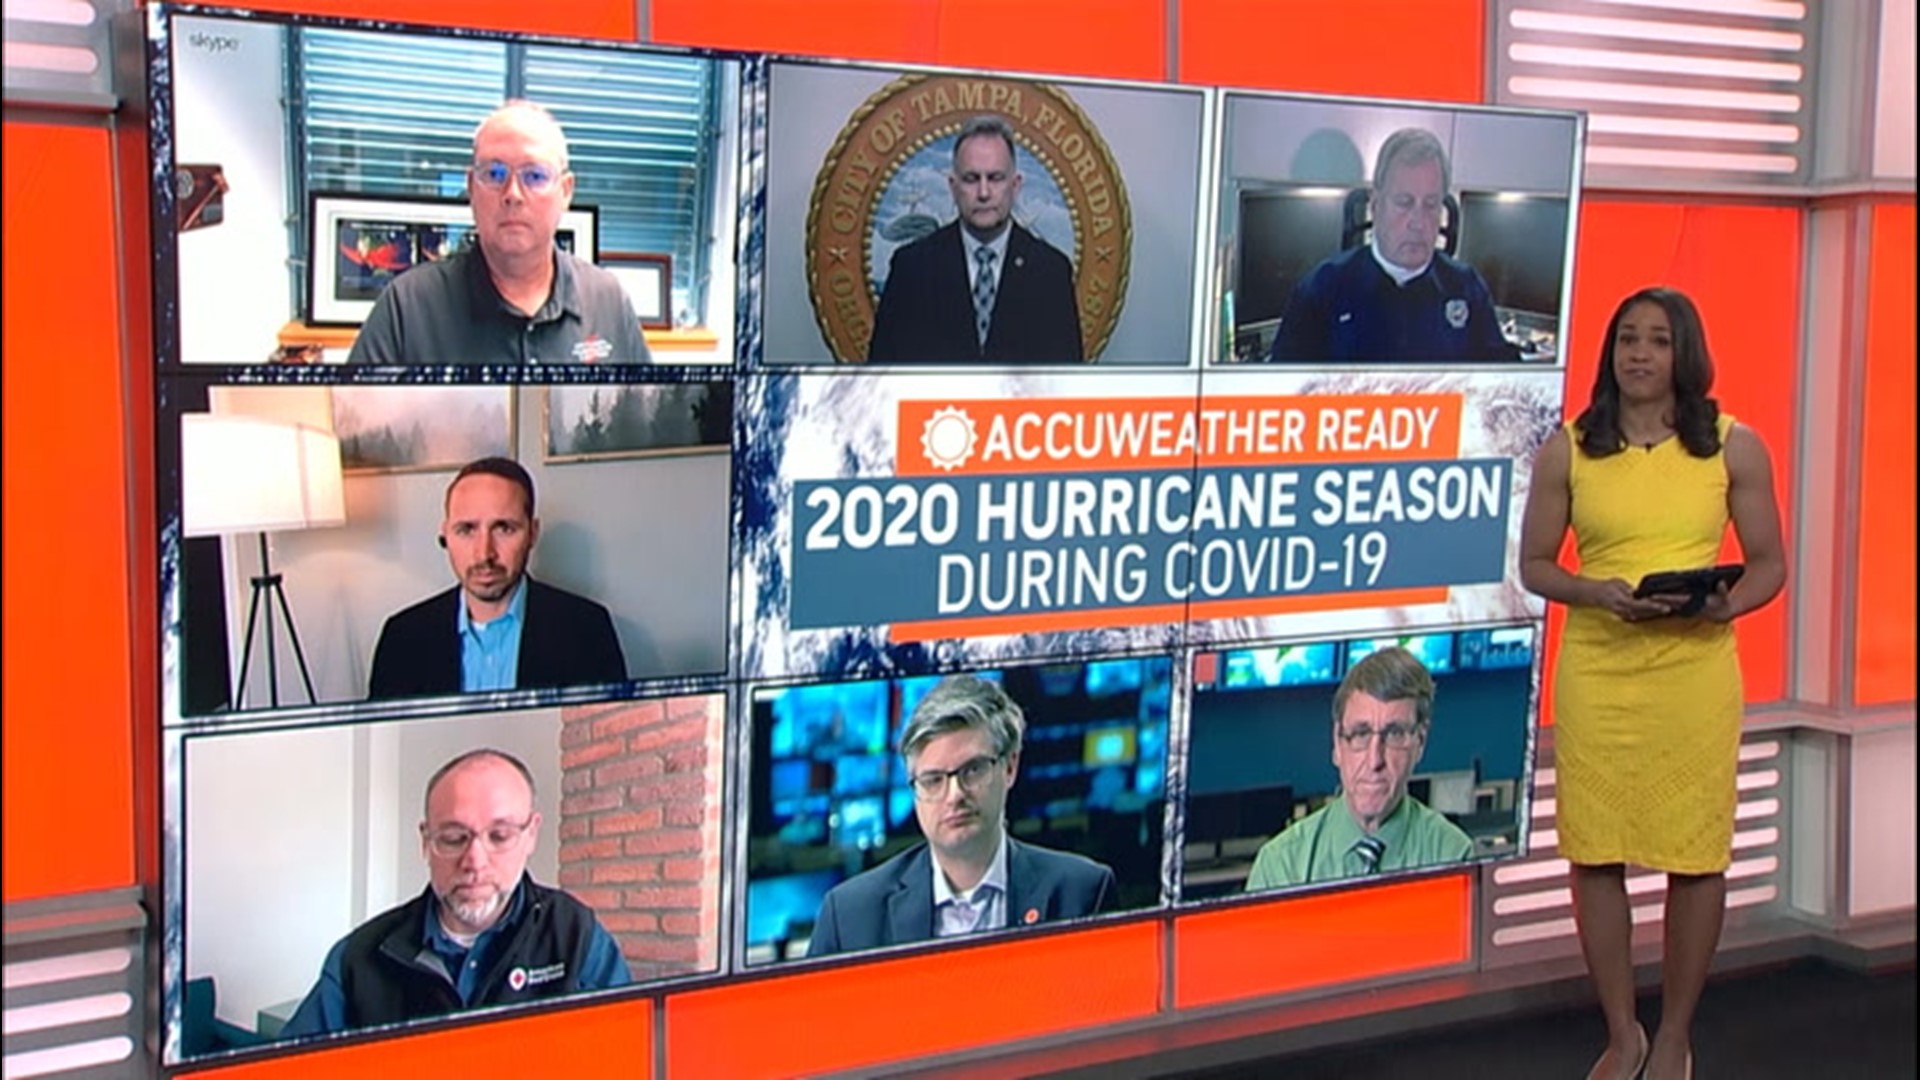 Brittany Boyer hosts AccuWeather's first-ever town hall. NHC's Ken Graham and others discuss hurricane season and COVID-19 challenges Thurs. night, 9 p.m. EDT.